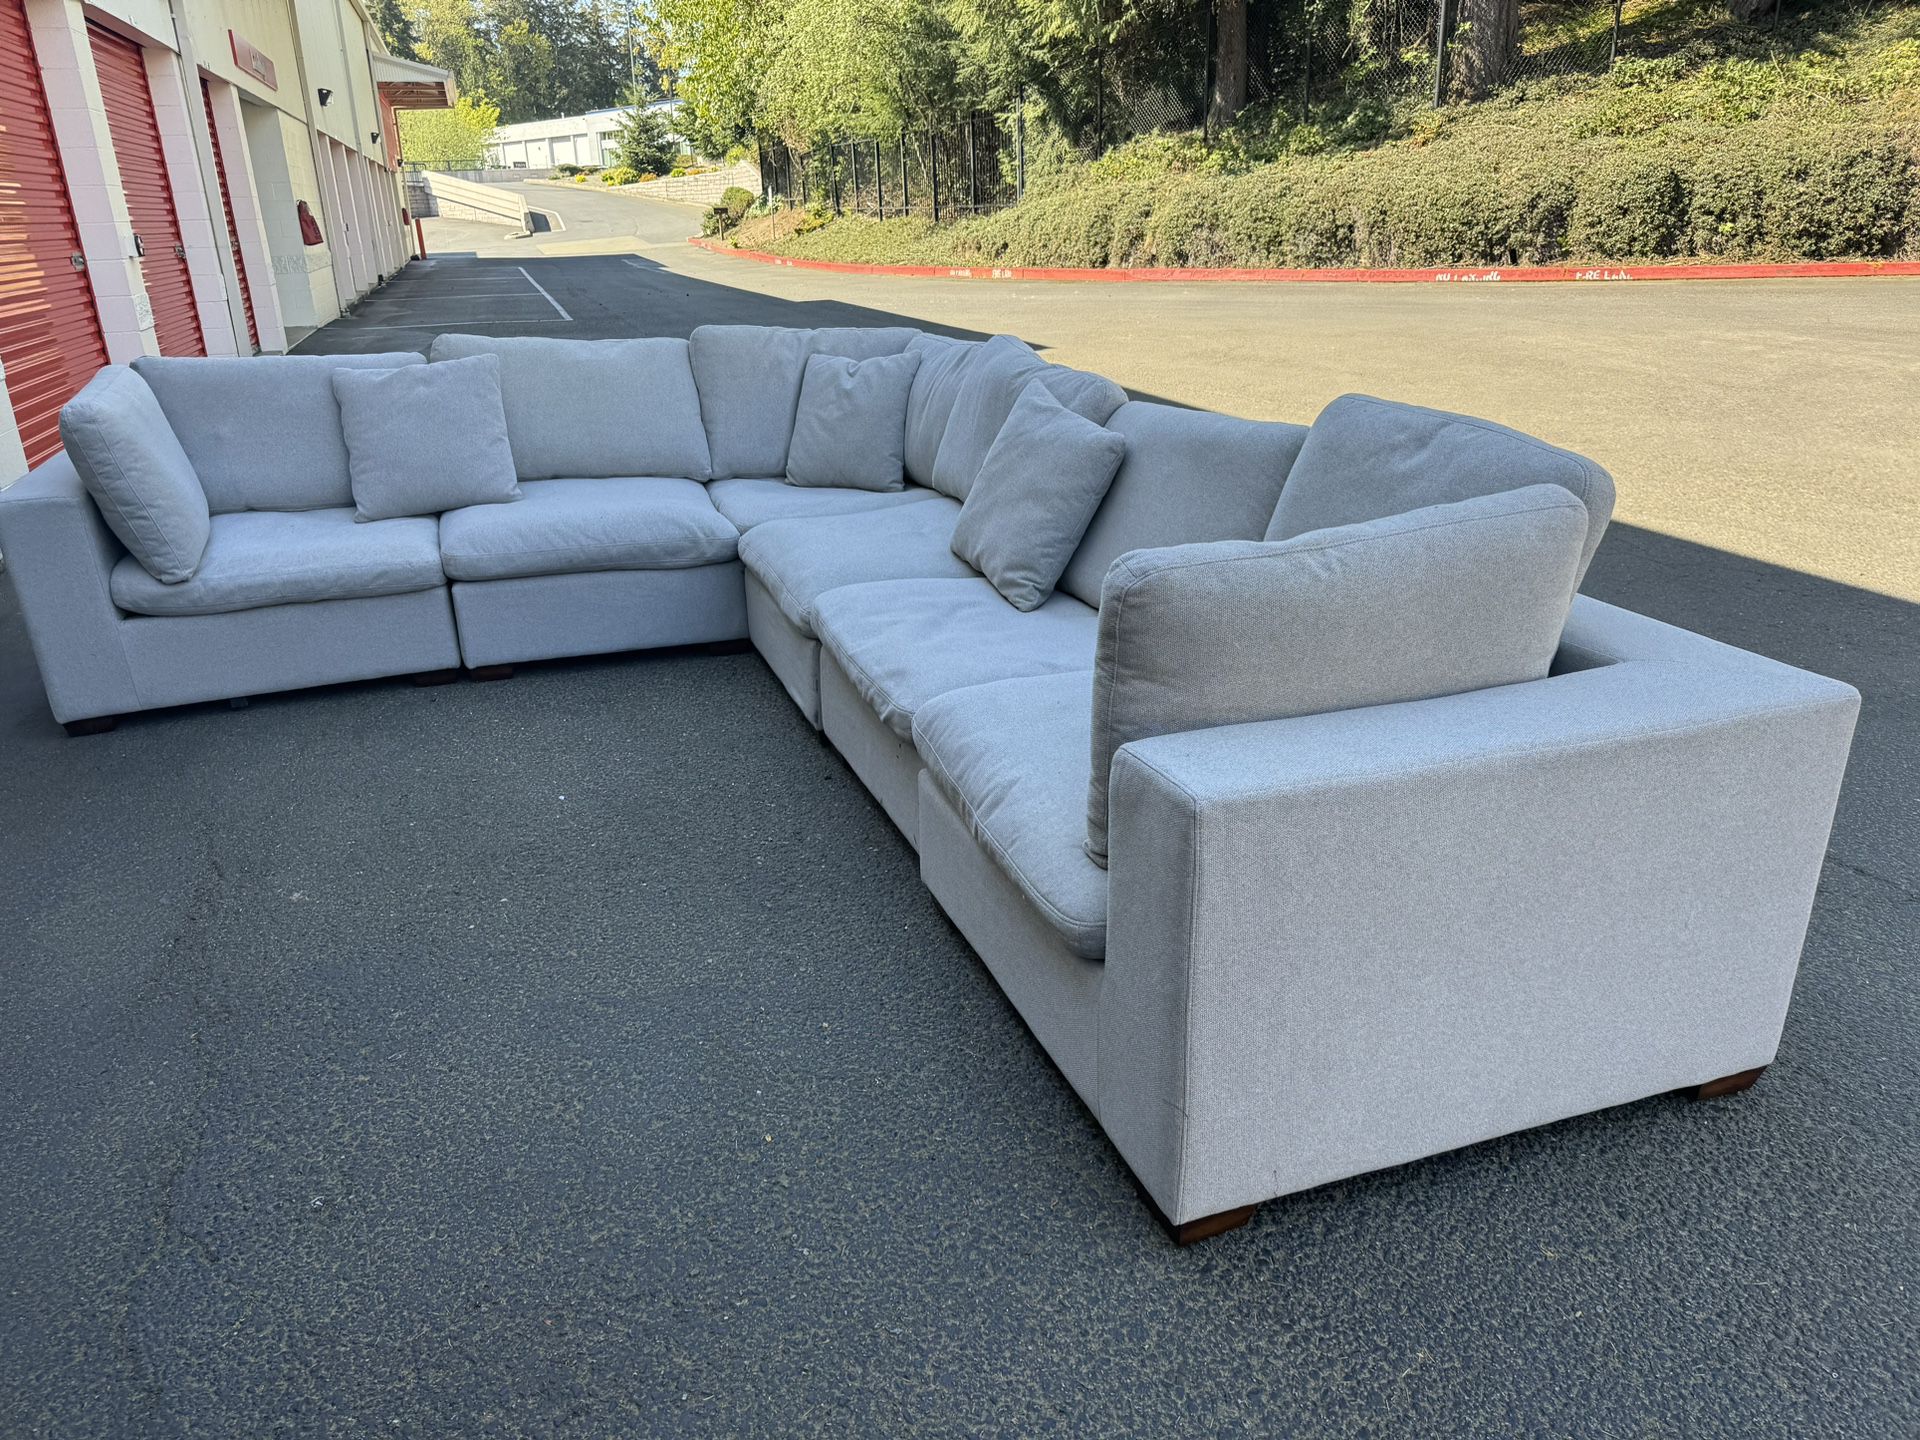 Sectional Modular Couch Sofa (Free Delivery)🚚 